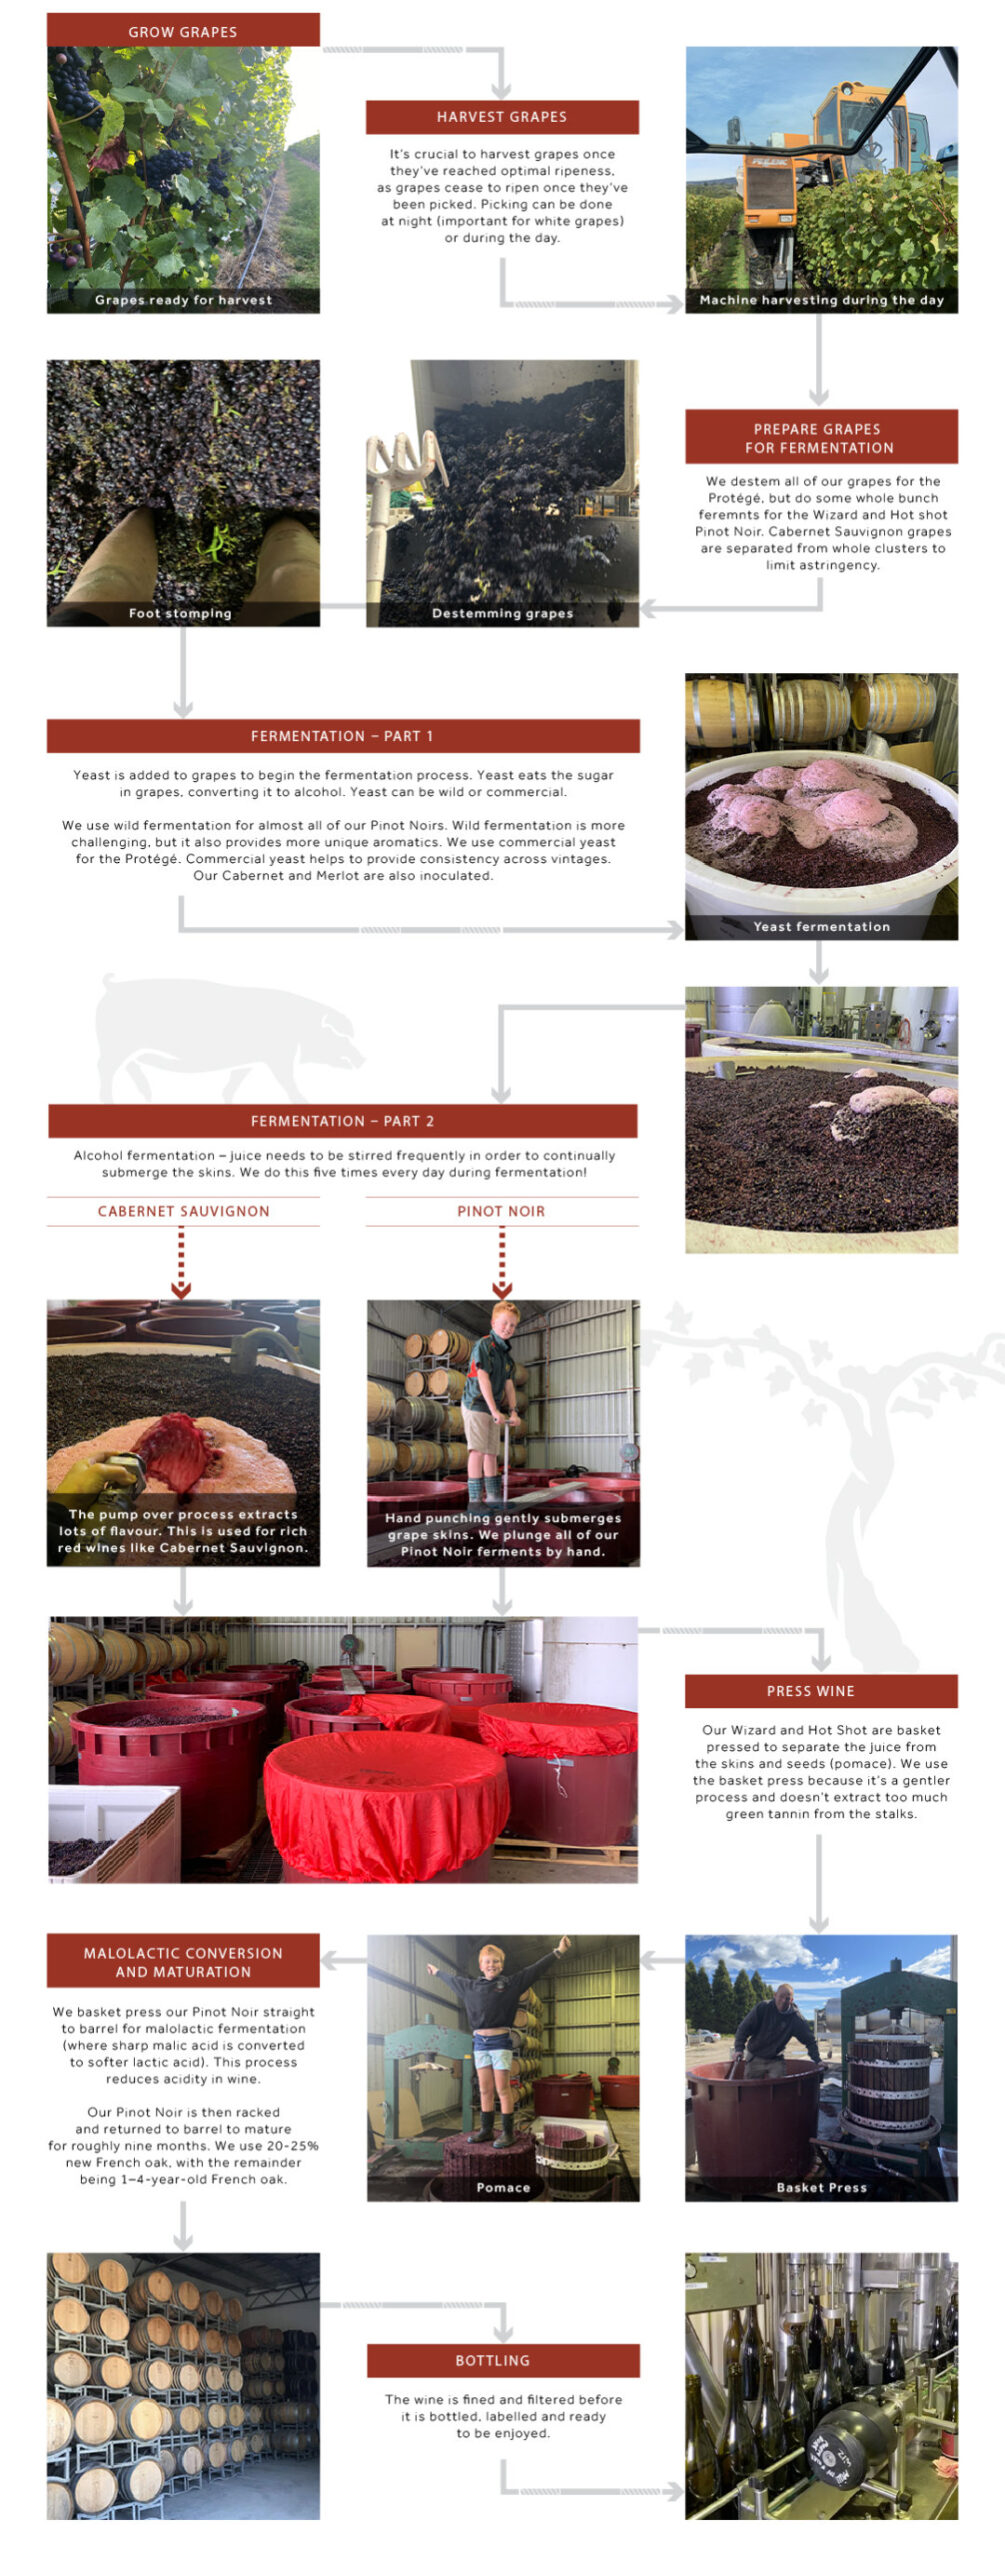 How red wine is made infographic